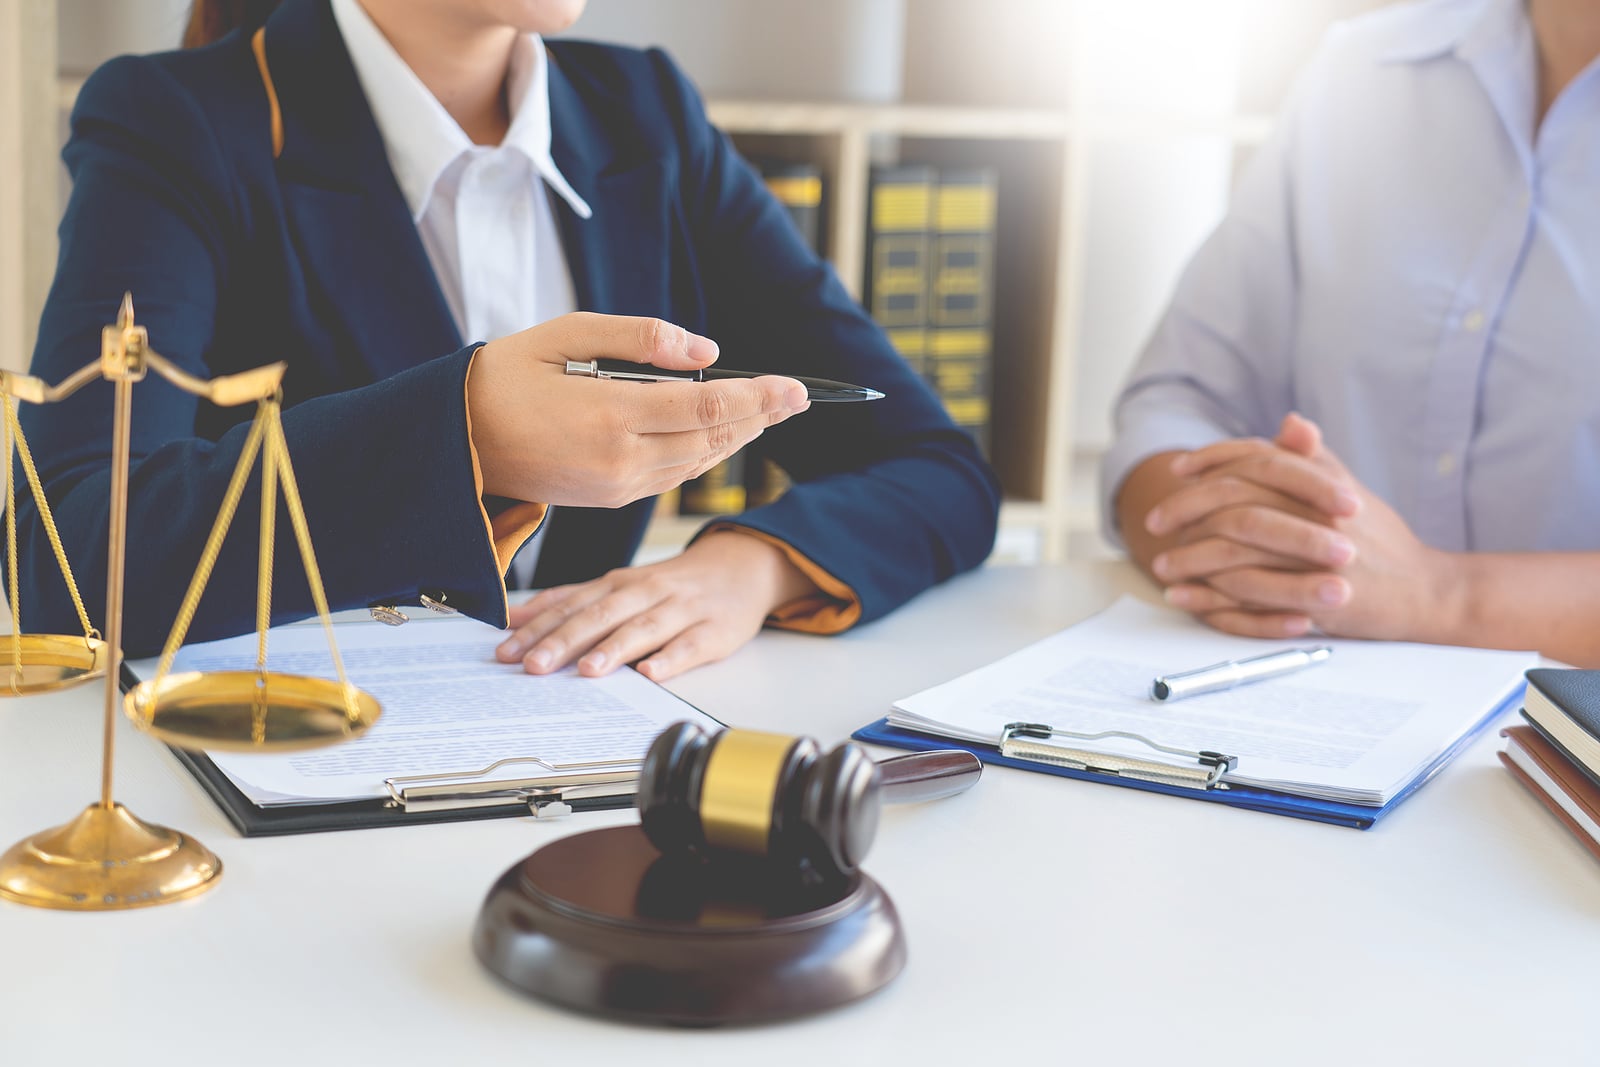 Once I Hire a Lawyer for My Case, Should I Speak to My Insurance Company?